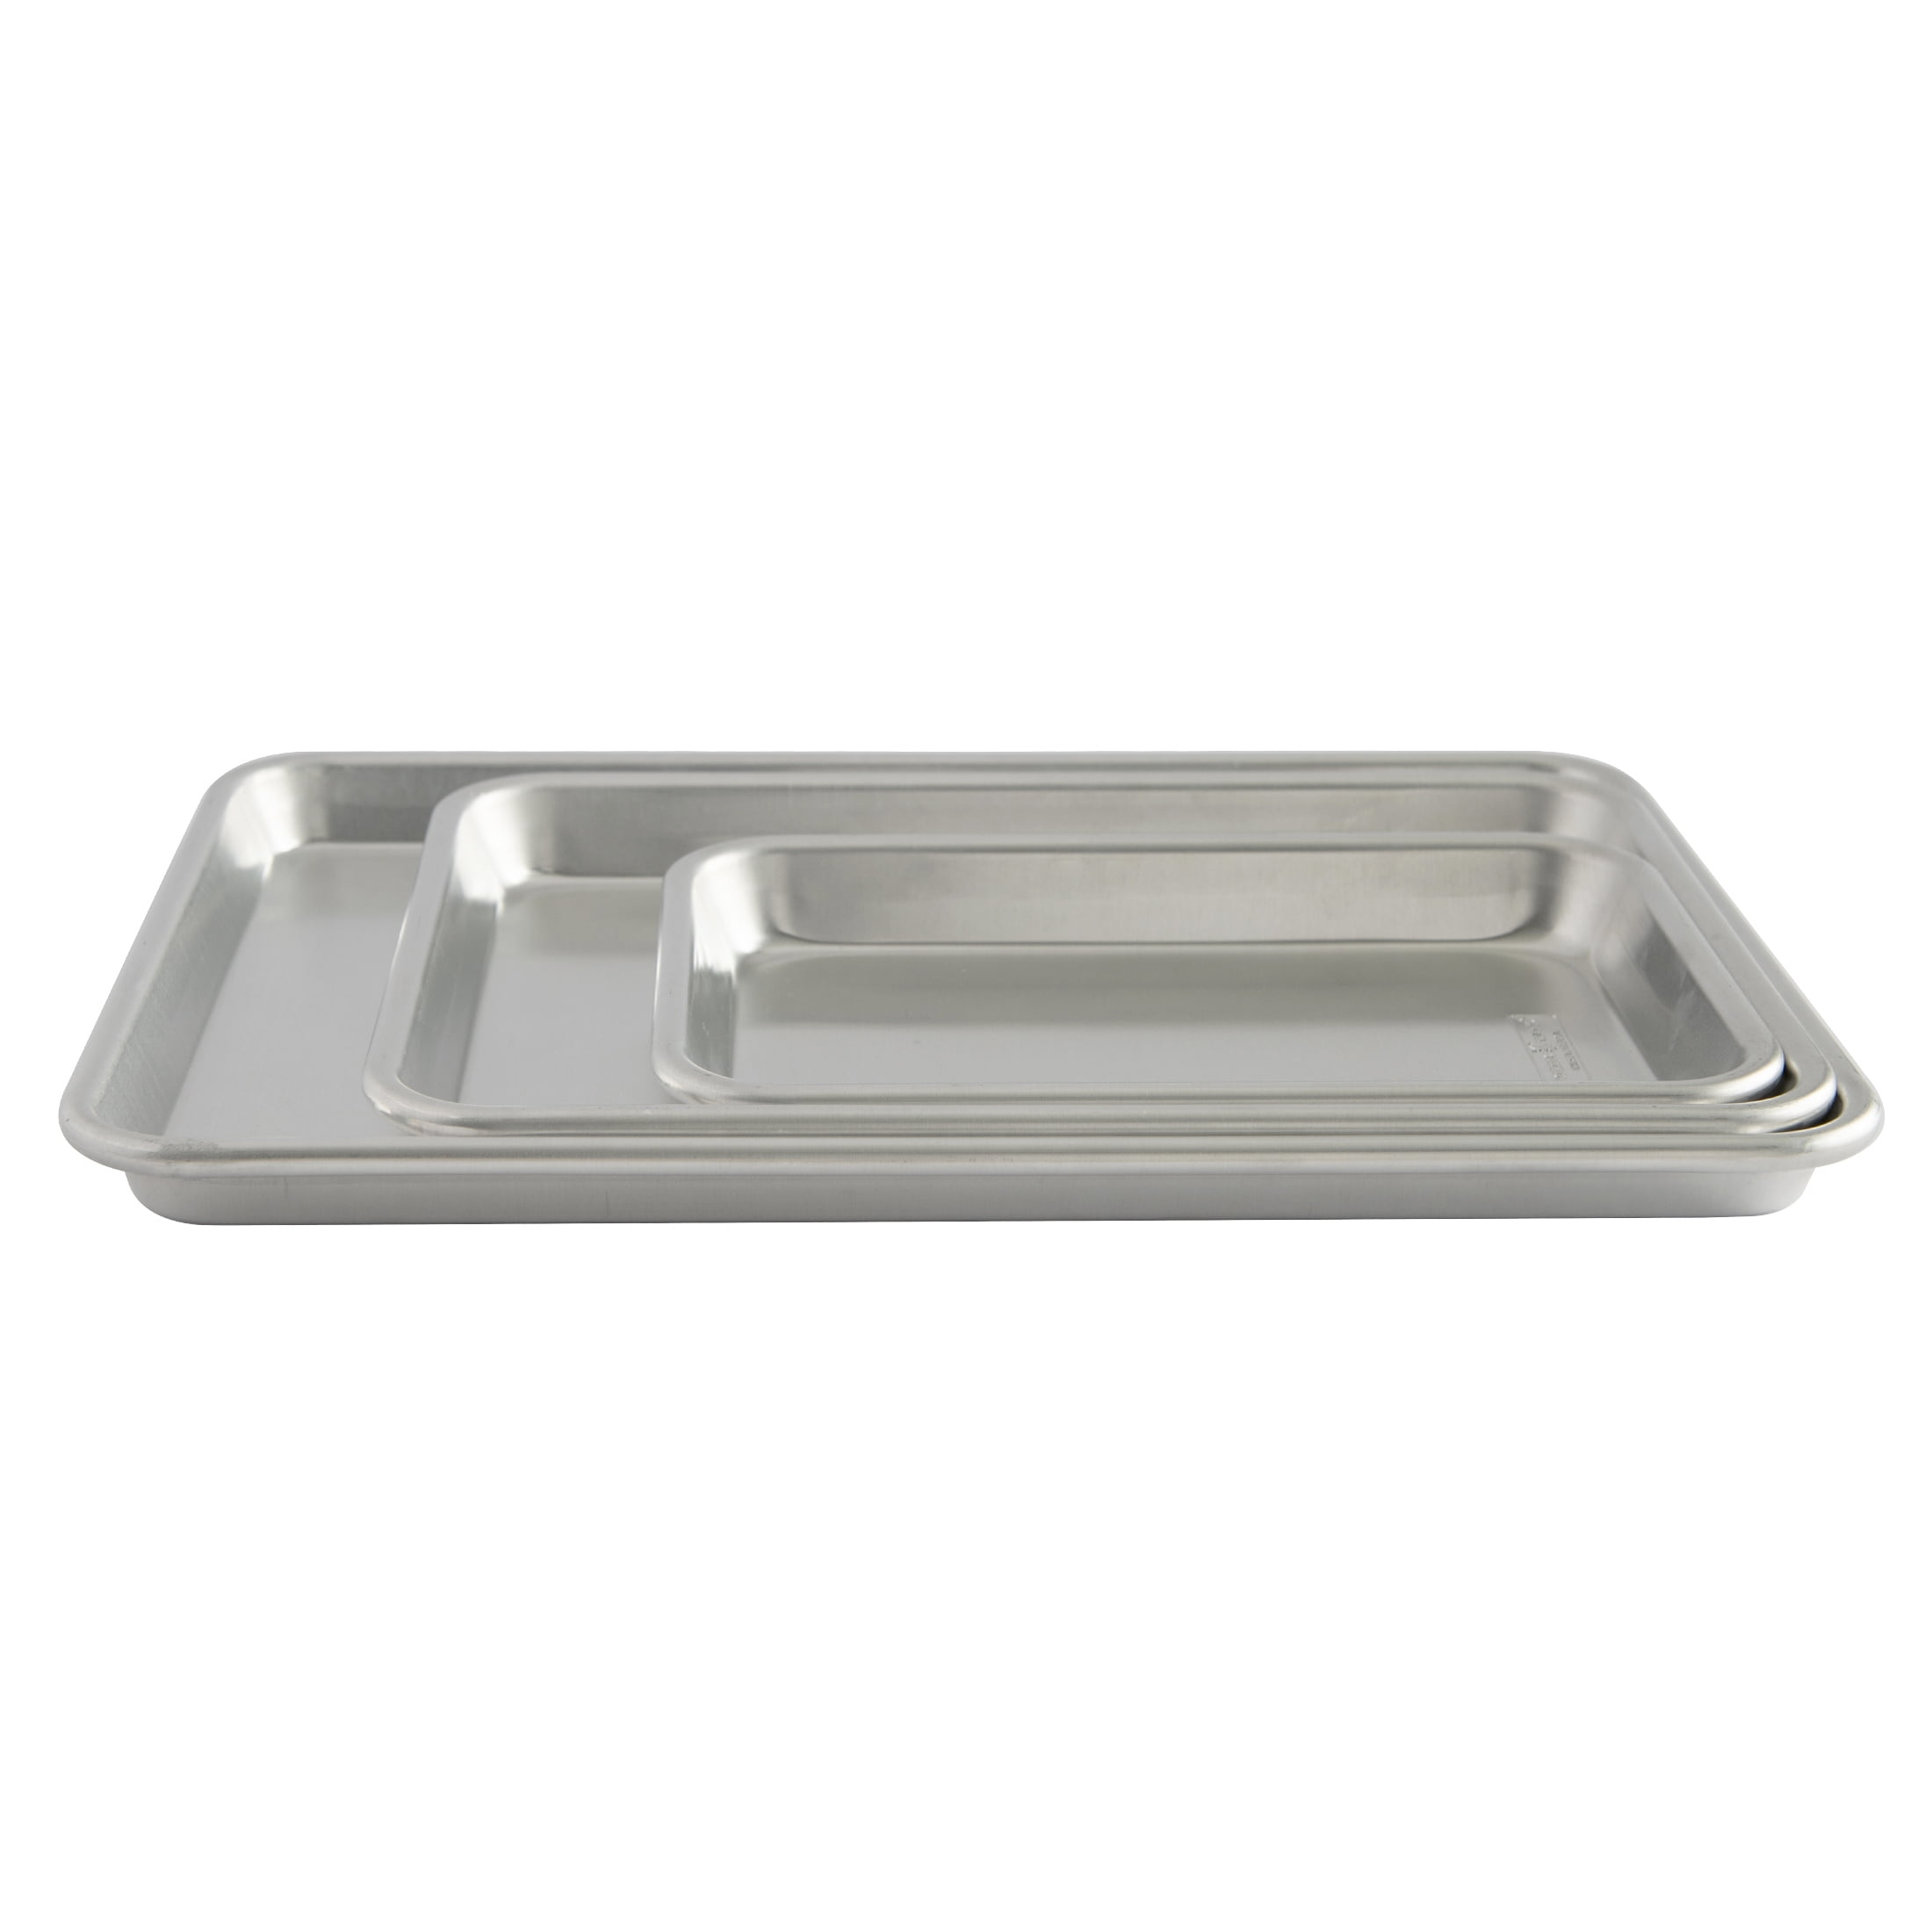 EATEX Aluminum Jelly Roll Sheet Baking Pan, Steel Nonstick Cookie sheet,  Size 15.8 in. x 11.3 in. x 1 in. JT-ABS-3 - The Home Depot